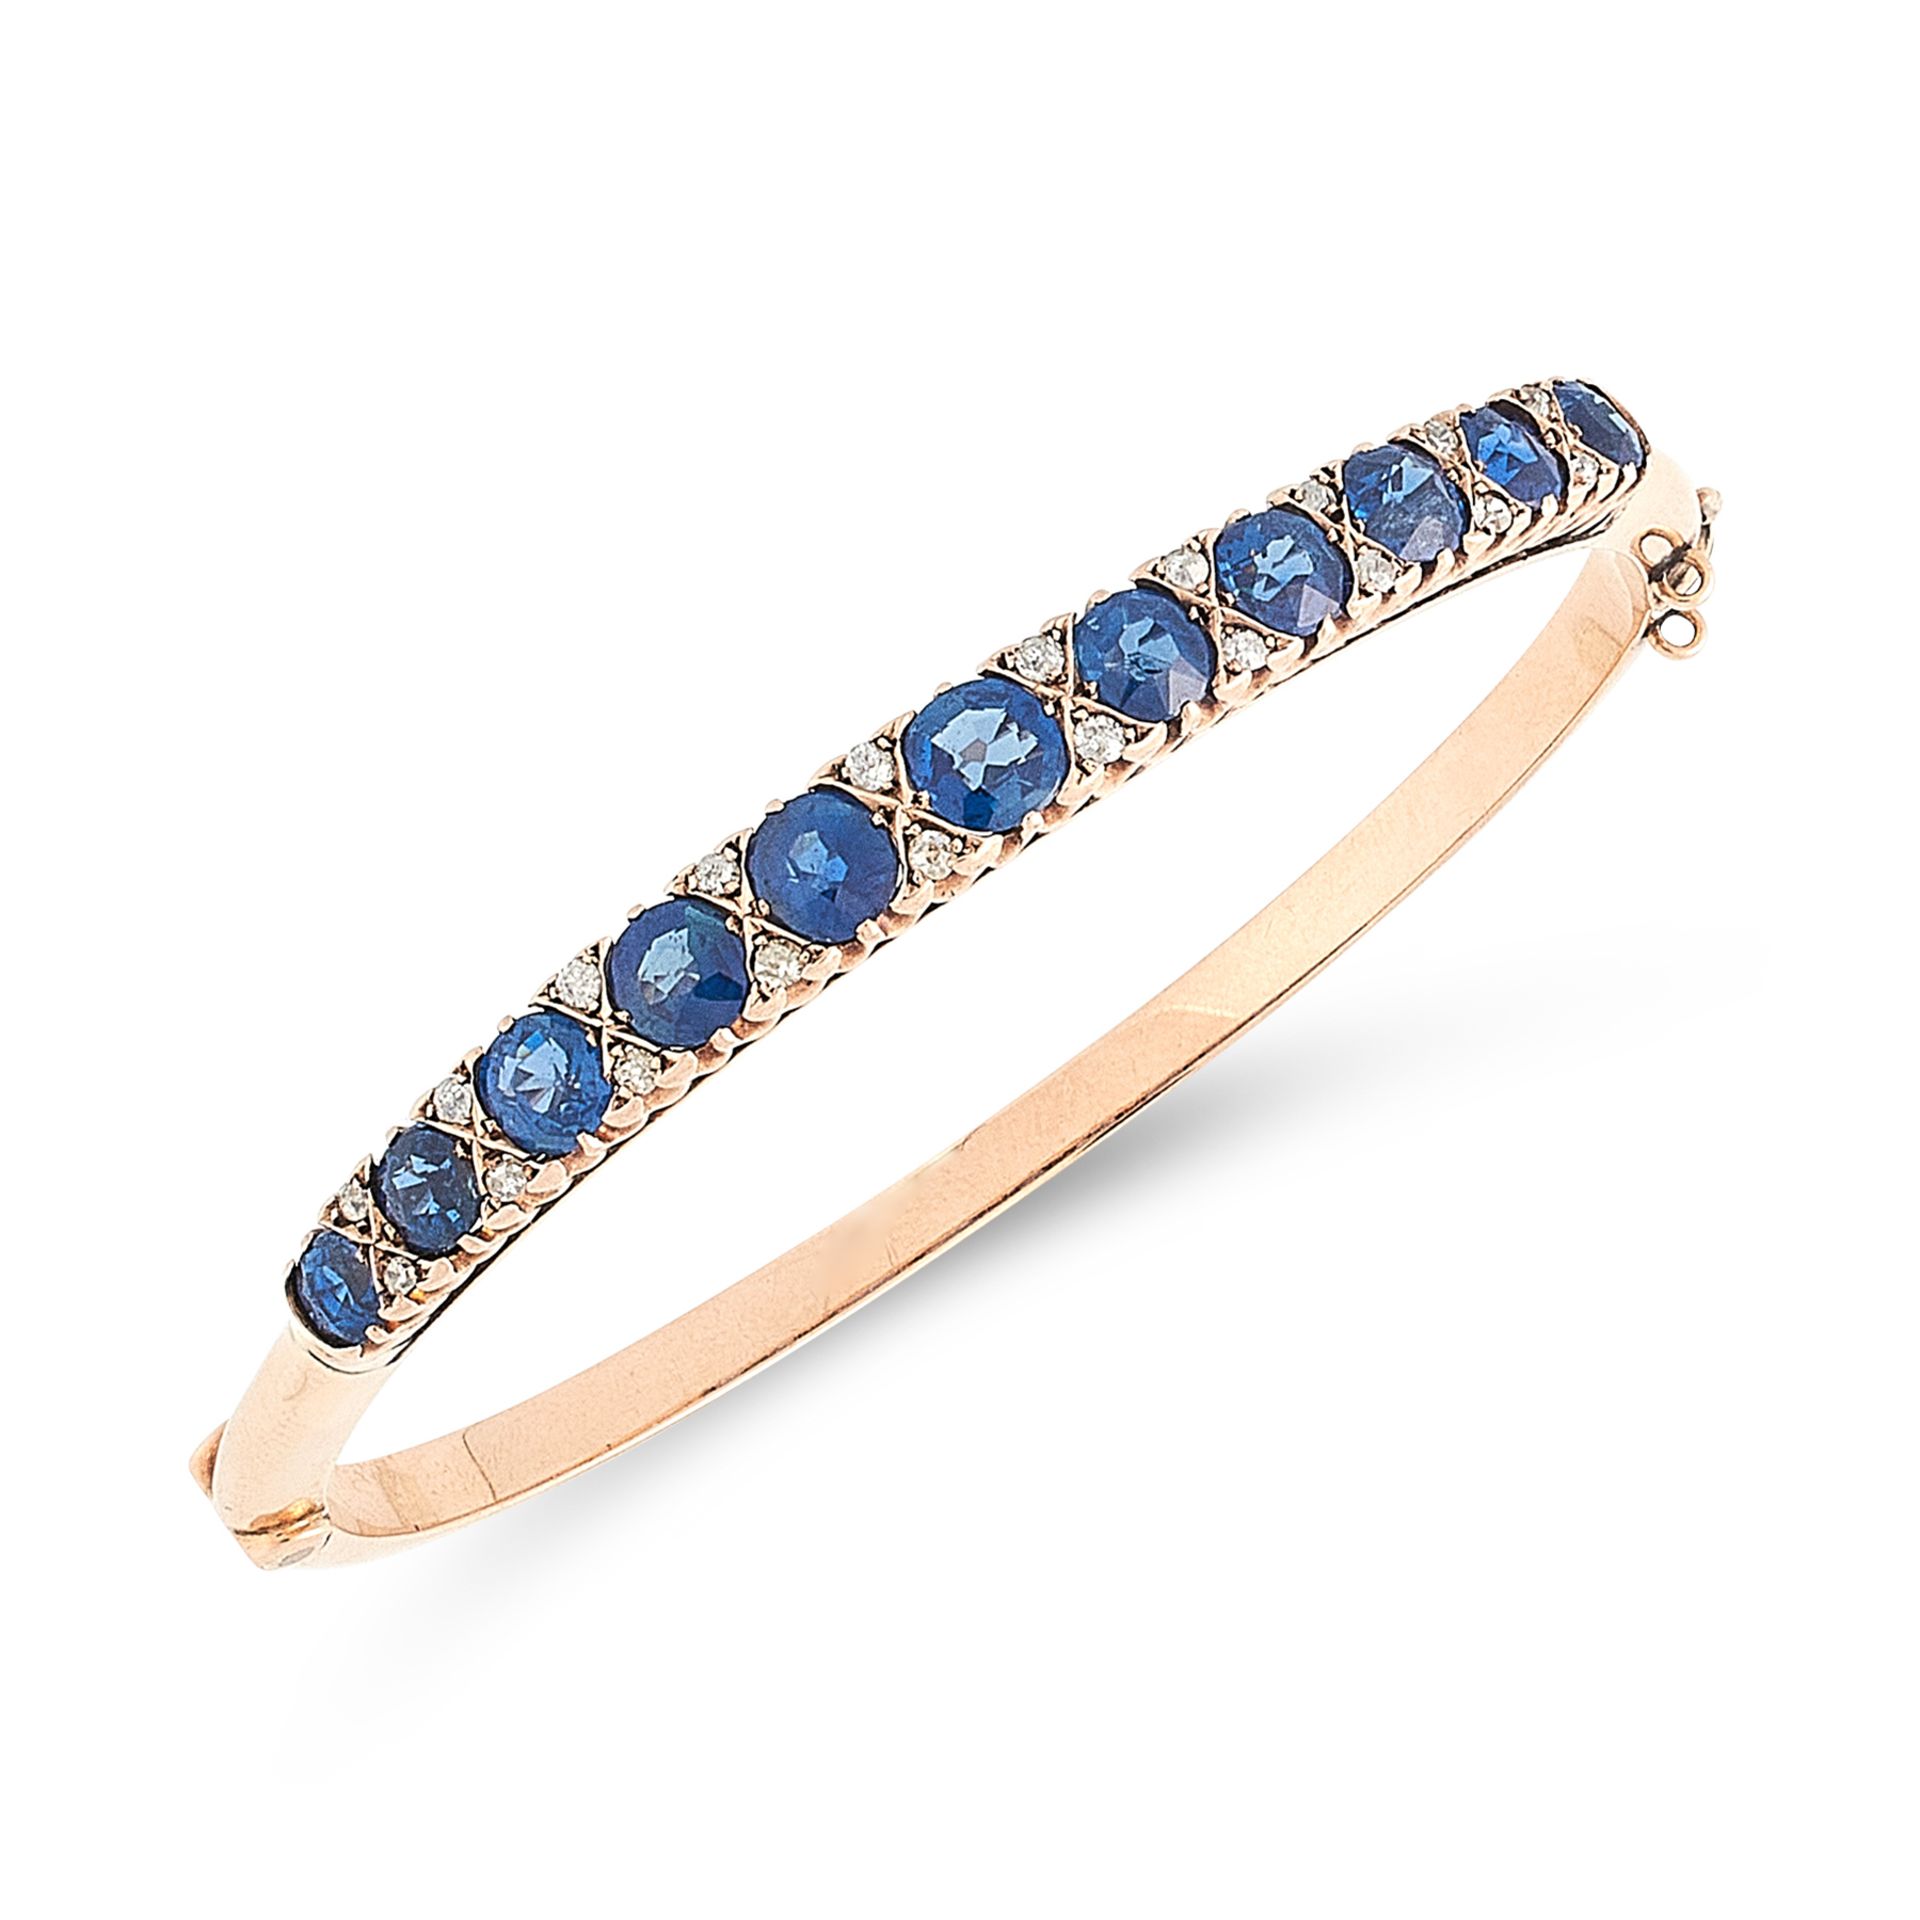 AN ANTIQUE SAPPHIRE AND DIAMOND BANGLE in high carat yellow gold, designed as a row of eleven